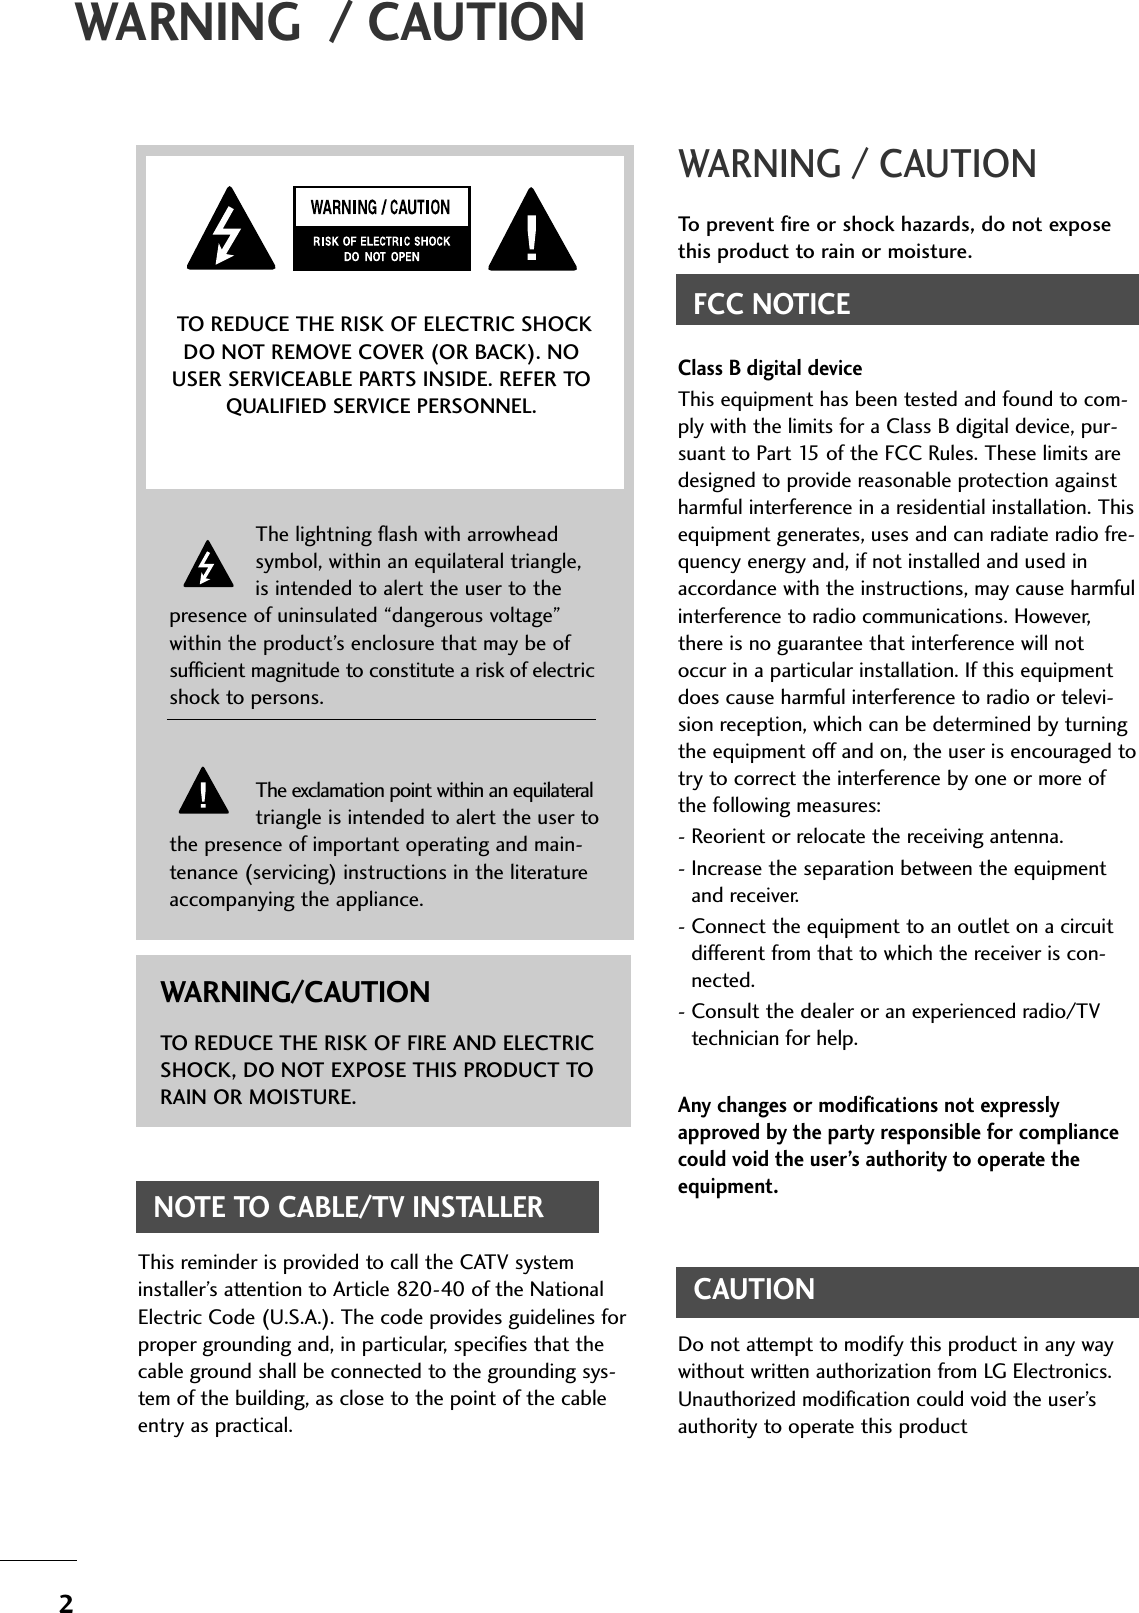 2WARNING  / CAUTIONWARNING / CAUTIONTo prevent fire or shock hazards, do not exposethis product to rain or moisture.FCC NOTICEClass B digital deviceThis equipment has been tested and found to com-ply with the limits for a Class B digital device, pur-suant to Part 15 of the FCC Rules. These limits aredesigned to provide reasonable protection againstharmful interference in a residential installation. Thisequipment generates, uses and can radiate radio fre-quency energy and, if not installed and used inaccordance with the instructions, may cause harmfulinterference to radio communications. However,there is no guarantee that interference will notoccur in a particular installation. If this equipmentdoes cause harmful interference to radio or televi-sion reception, which can be determined by turningthe equipment off and on, the user is encouraged totry to correct the interference by one or more ofthe following measures:- Reorient or relocate the receiving antenna.- Increase the separation between the equipmentand receiver.- Connect the equipment to an outlet on a circuitdifferent from that to which the receiver is con-nected.- Consult the dealer or an experienced radio/TVtechnician for help.Any changes or modifications not expresslyapproved by the party responsible for compliancecould void the user’s authority to operate theequipment.CAUTIONDo not attempt to modify this product in any waywithout written authorization from LG Electronics.Unauthorized modification could void the user’sauthority to operate this product The lightning flash with arrowheadsymbol, within an equilateral triangle,is intended to alert the user to thepresence of uninsulated “dangerous voltage”within the product’s enclosure that may be ofsufficient magnitude to constitute a risk of electricshock to persons.The exclamation point within an equilateraltriangle is intended to alert the user tothe presence of important operating and main-tenance (servicing) instructions in the literatureaccompanying the appliance.TO REDUCE THE RISK OF ELECTRIC SHOCKDO NOT REMOVE COVER (OR BACK). NOUSER SERVICEABLE PARTS INSIDE. REFER TOQUALIFIED SERVICE PERSONNEL.WARNING/CAUTIONTO REDUCE THE RISK OF FIRE AND ELECTRICSHOCK, DO NOT EXPOSE THIS PRODUCT TORAIN OR MOISTURE.NOTE TO CABLE/TV INSTALLERThis reminder is provided to call the CATV systeminstaller’s attention to Article 820-40 of the NationalElectric Code (U.S.A.). The code provides guidelines forproper grounding and, in particular, specifies that thecable ground shall be connected to the grounding sys-tem of the building, as close to the point of the cableentry as practical.